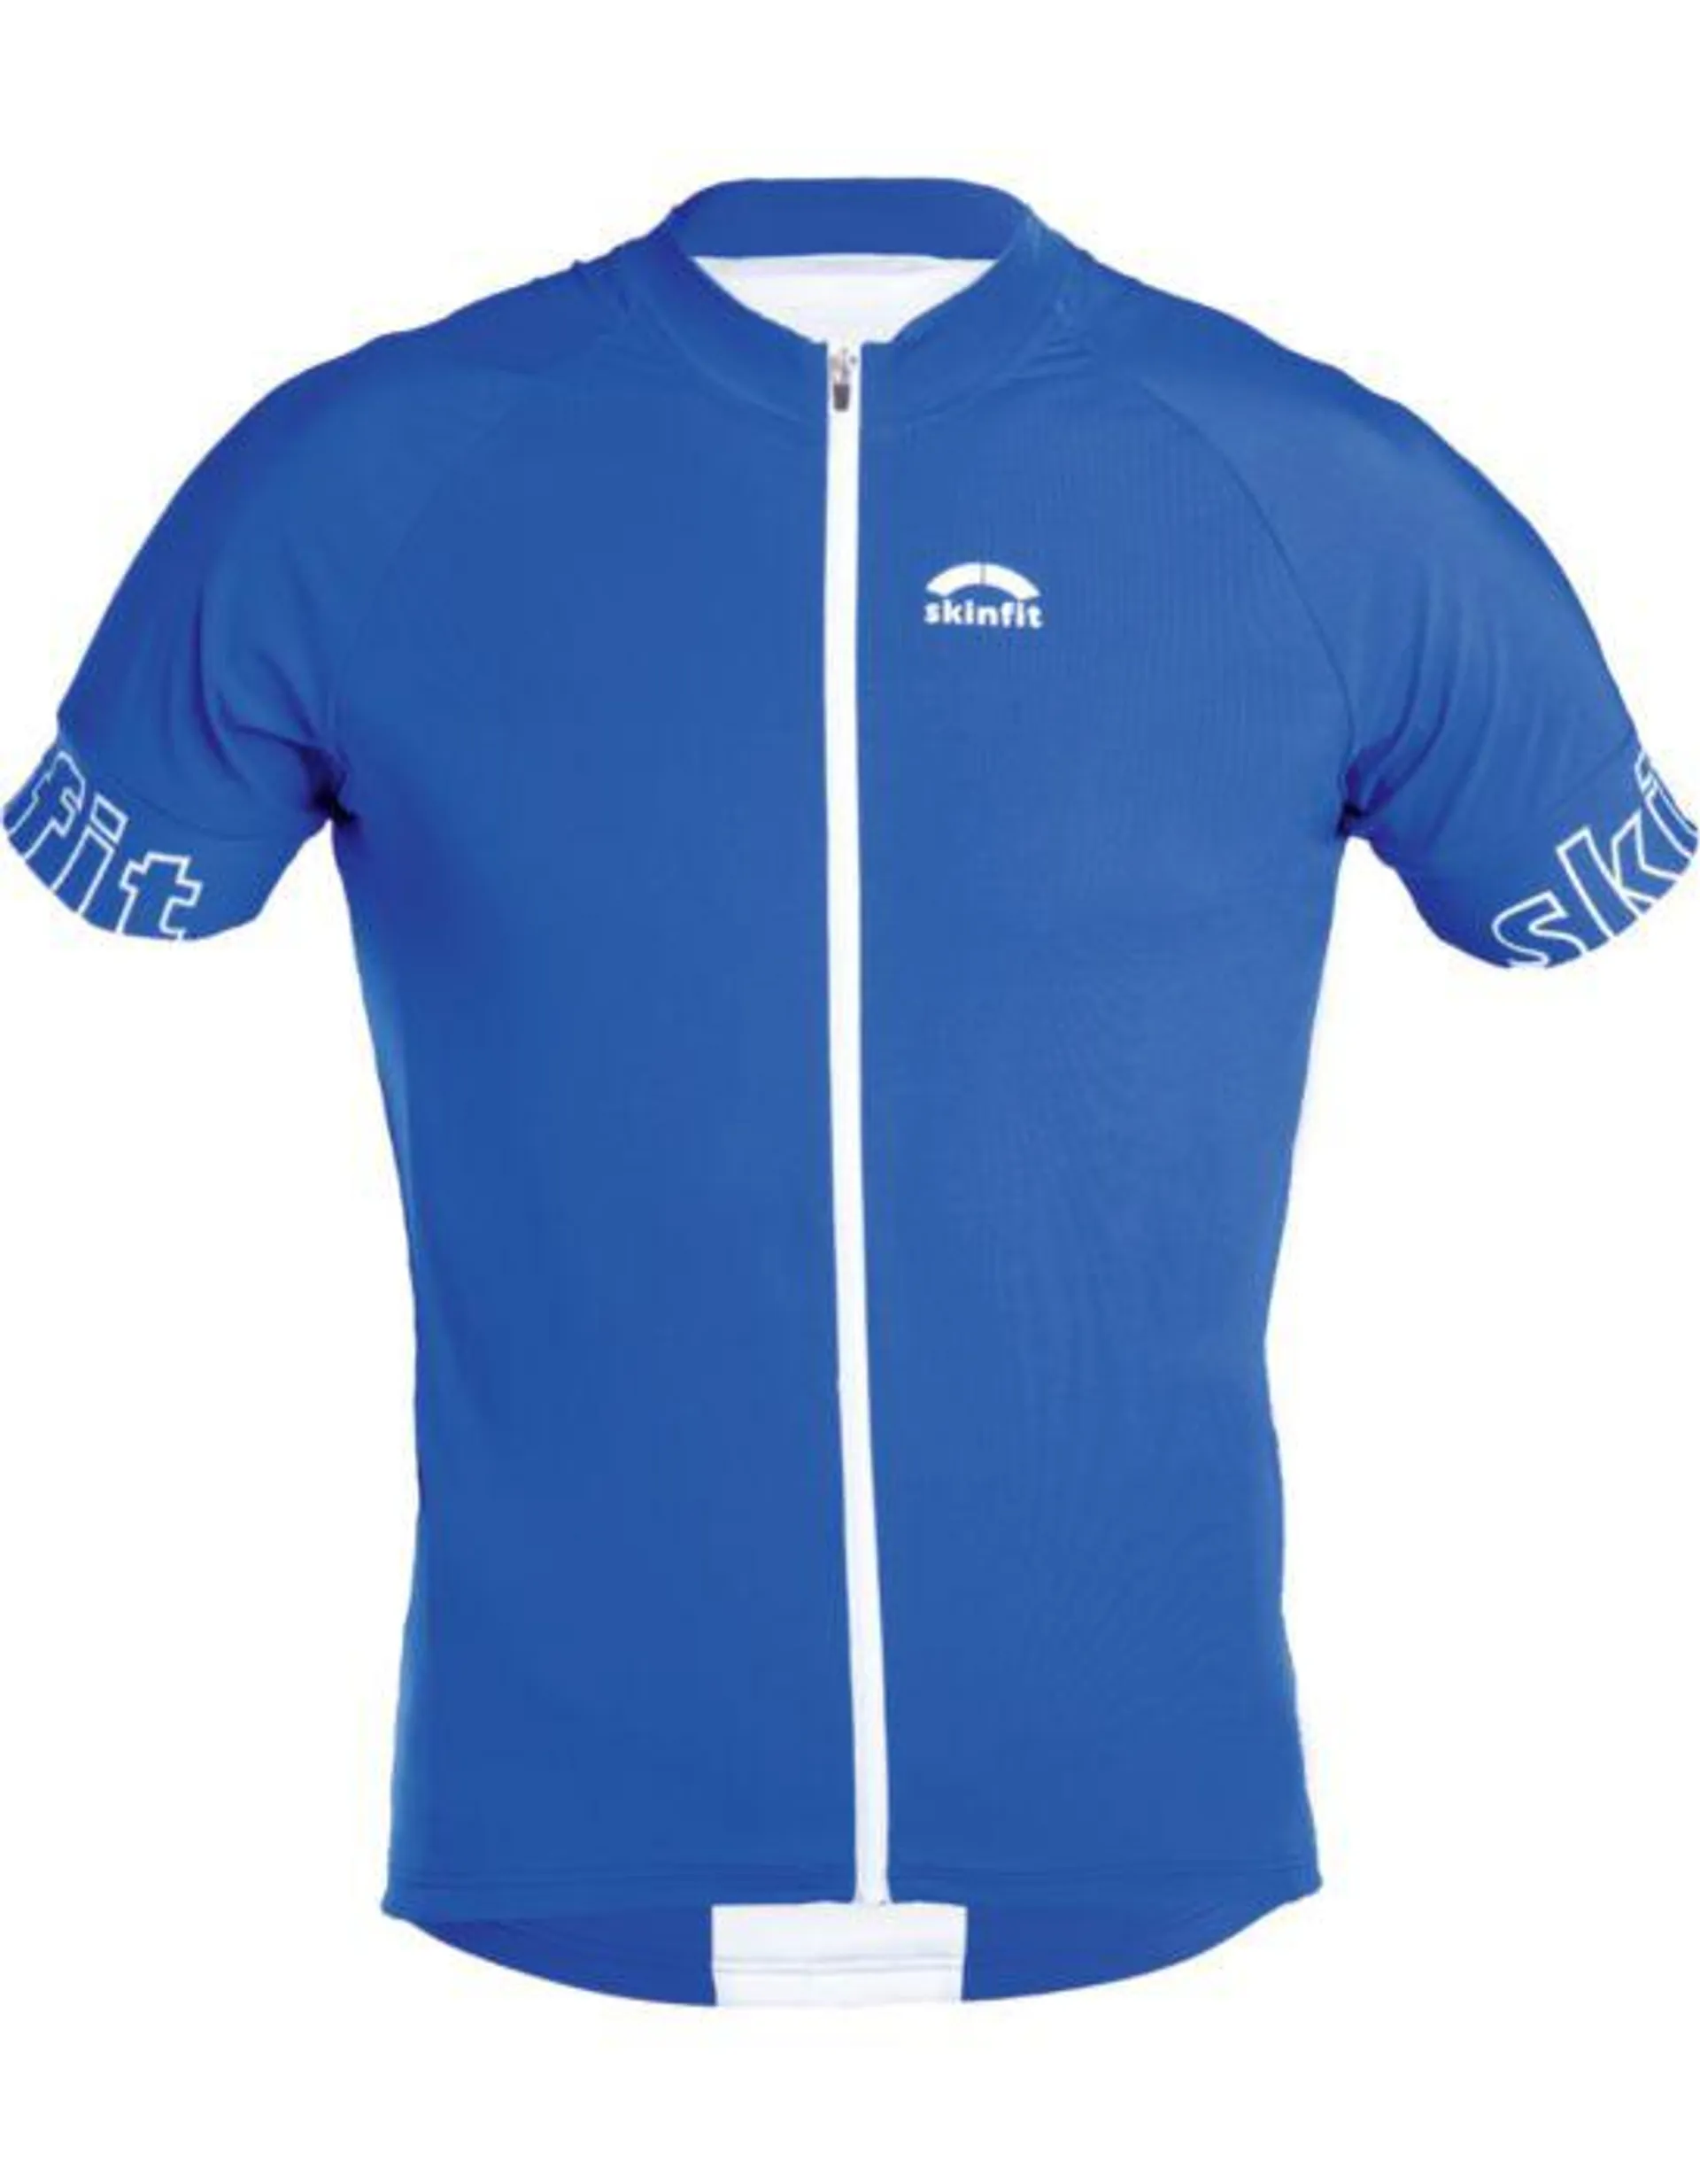 Mont Ventoux Cycling Jersey